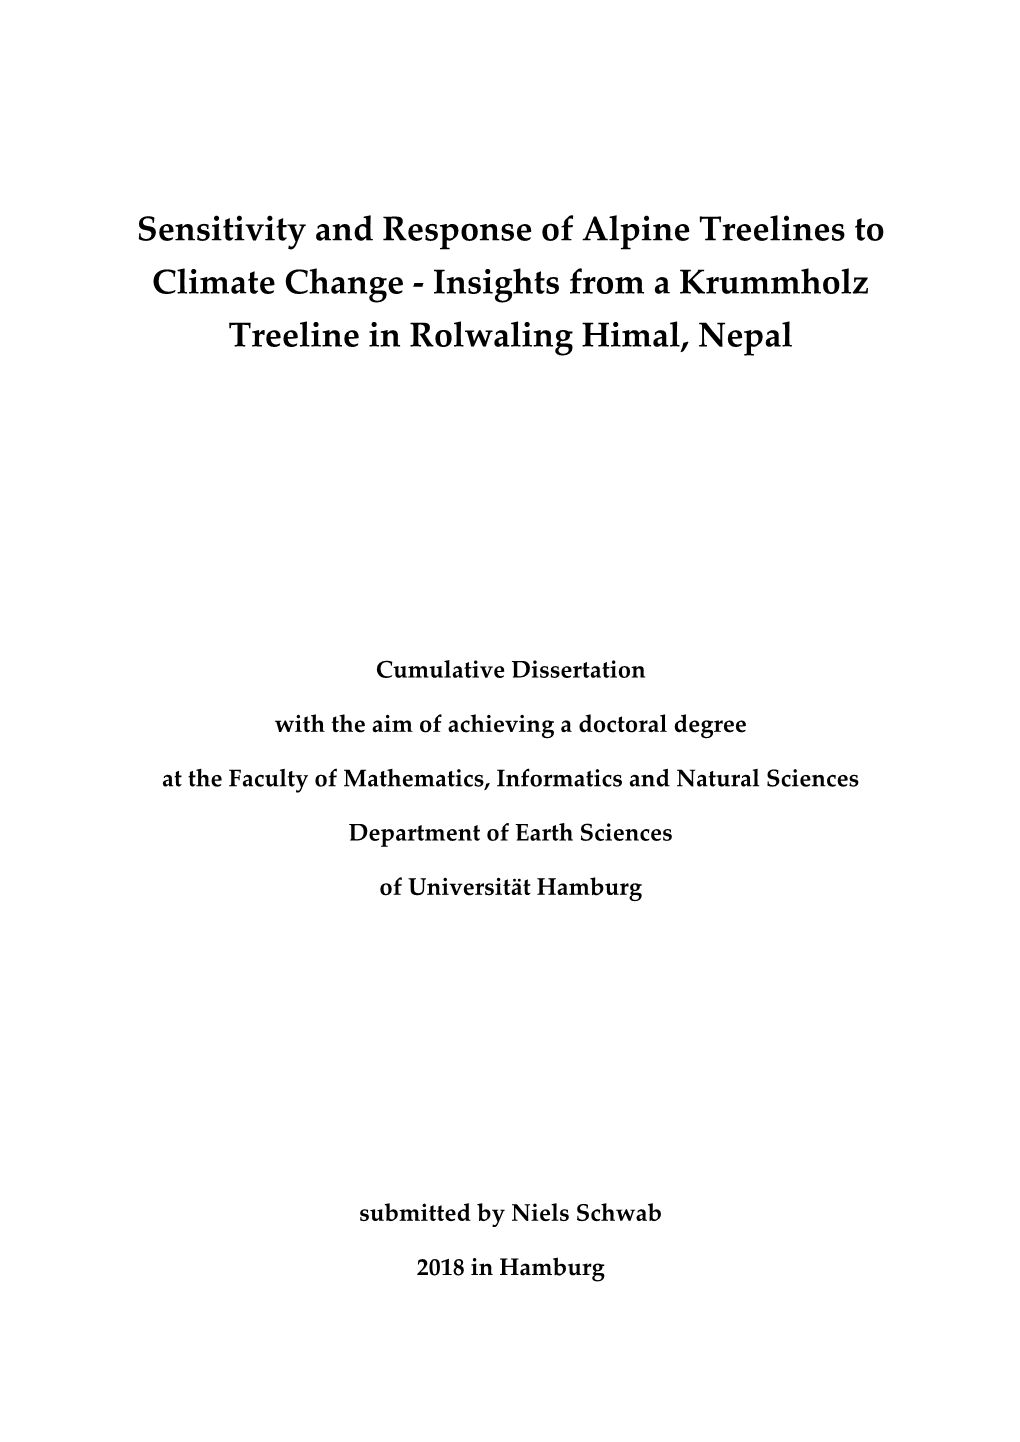 Sensitivity and Response of Alpine Treelines to Climate Change - Insights from a Krummholz Treeline in Rolwaling Himal, Nepal